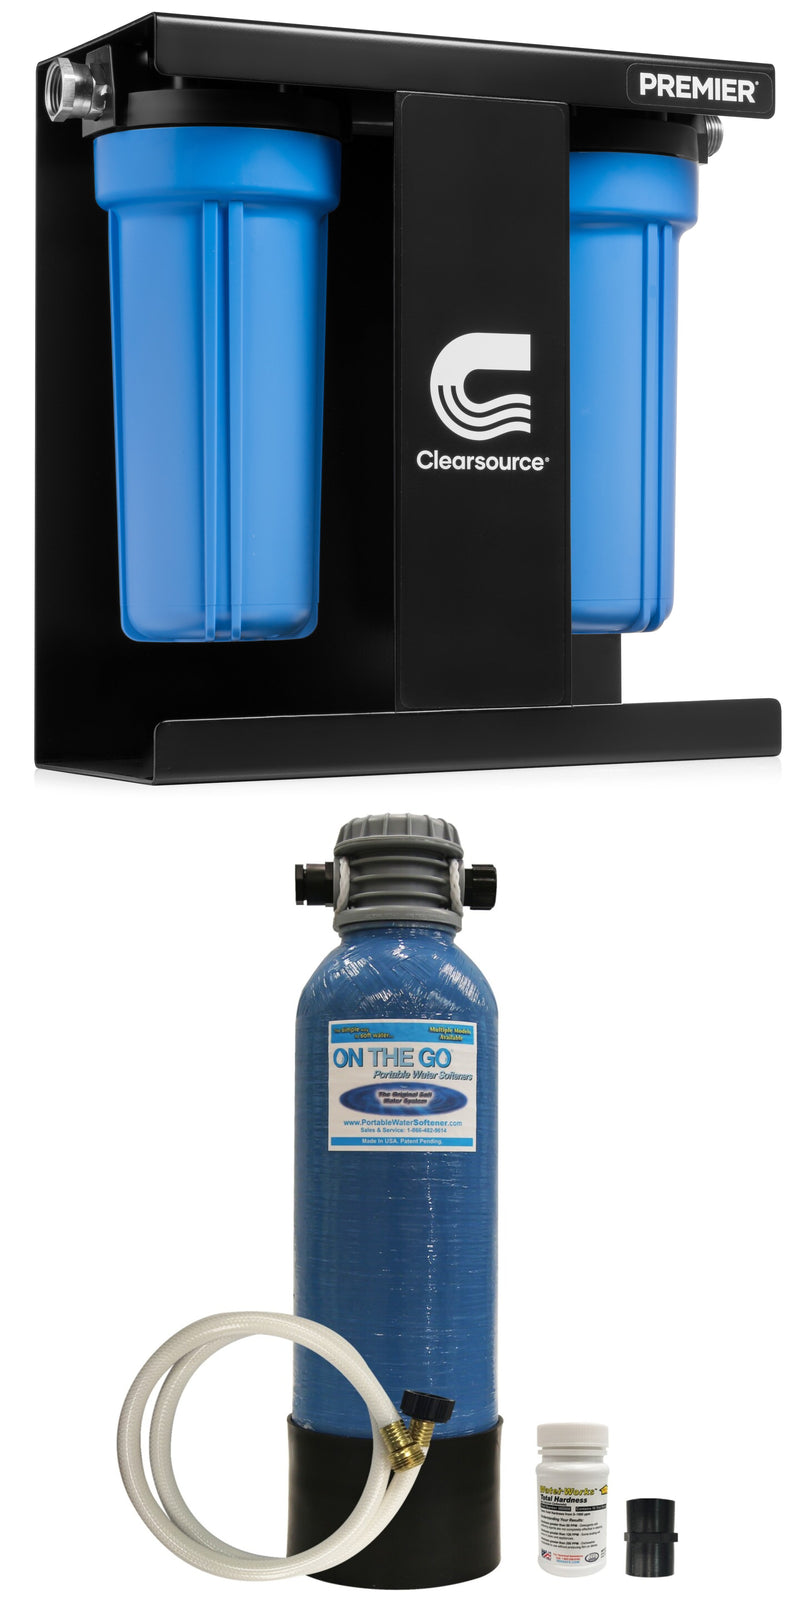 Clearsource 2 canister and on the go standard water softener bundle